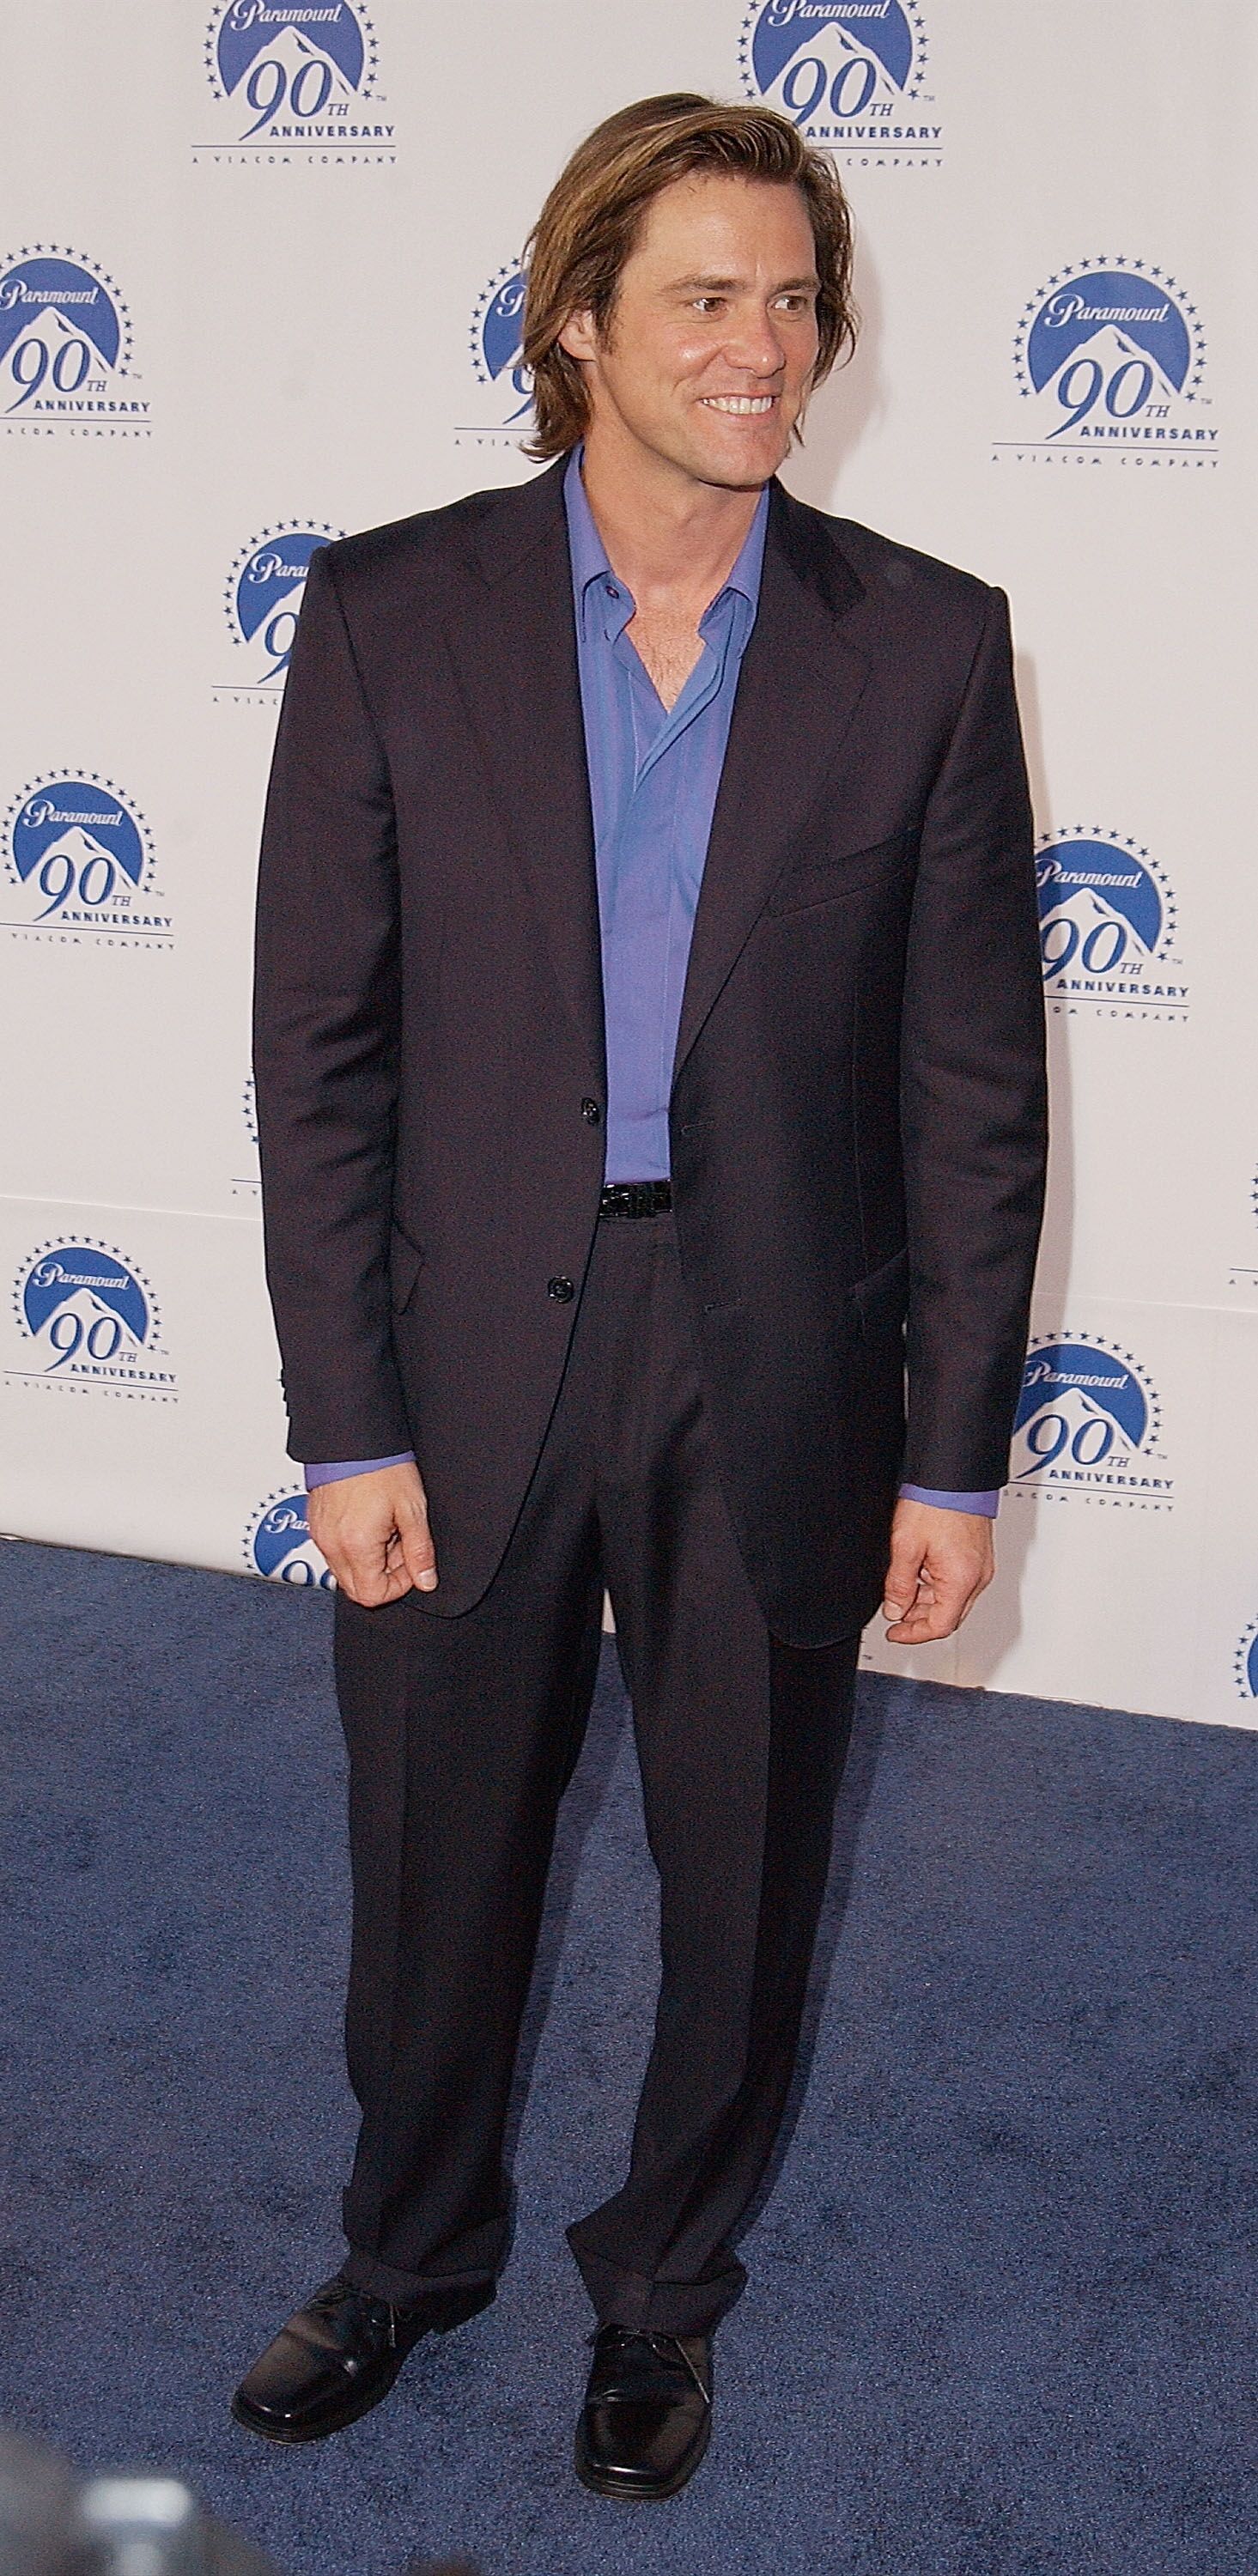 Jim Carrey attends Paramount Pictures' "90 Stars for 90 Years" Anniversary Celebration at the Paramount Pictures Studios in 2012 | Photo: Getty Images